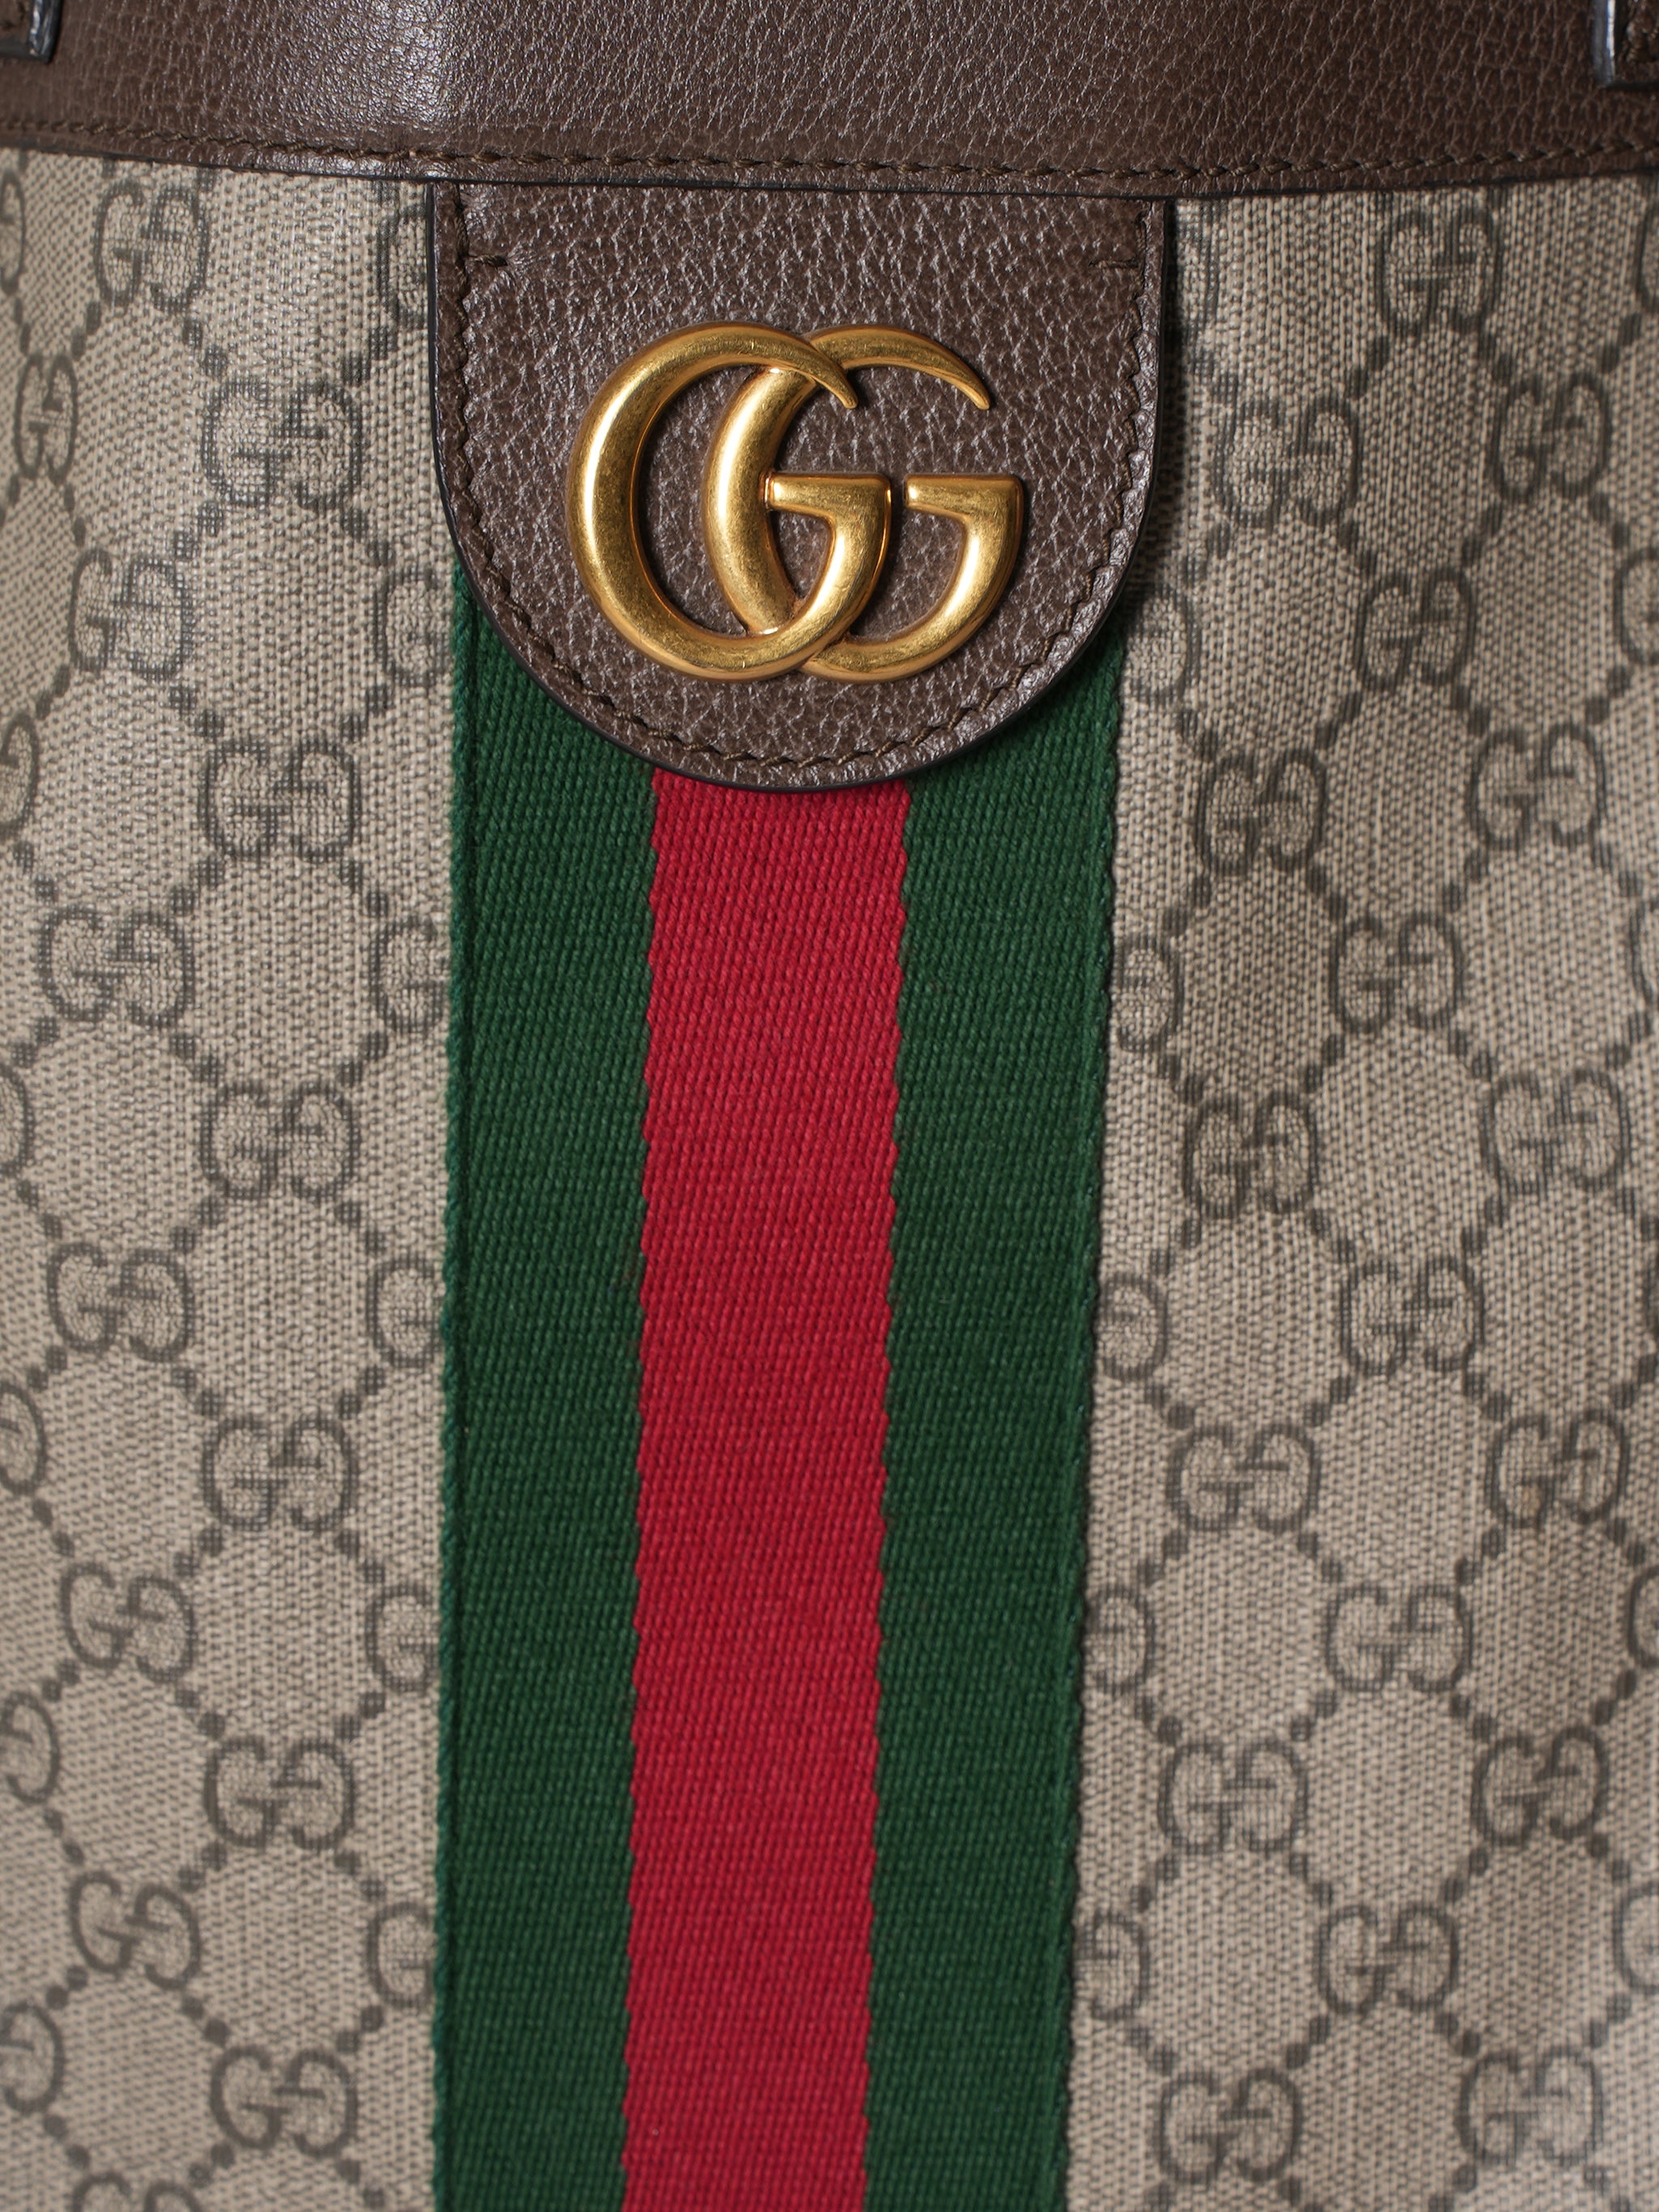 Gucci Ophida Large GG Tote Bag